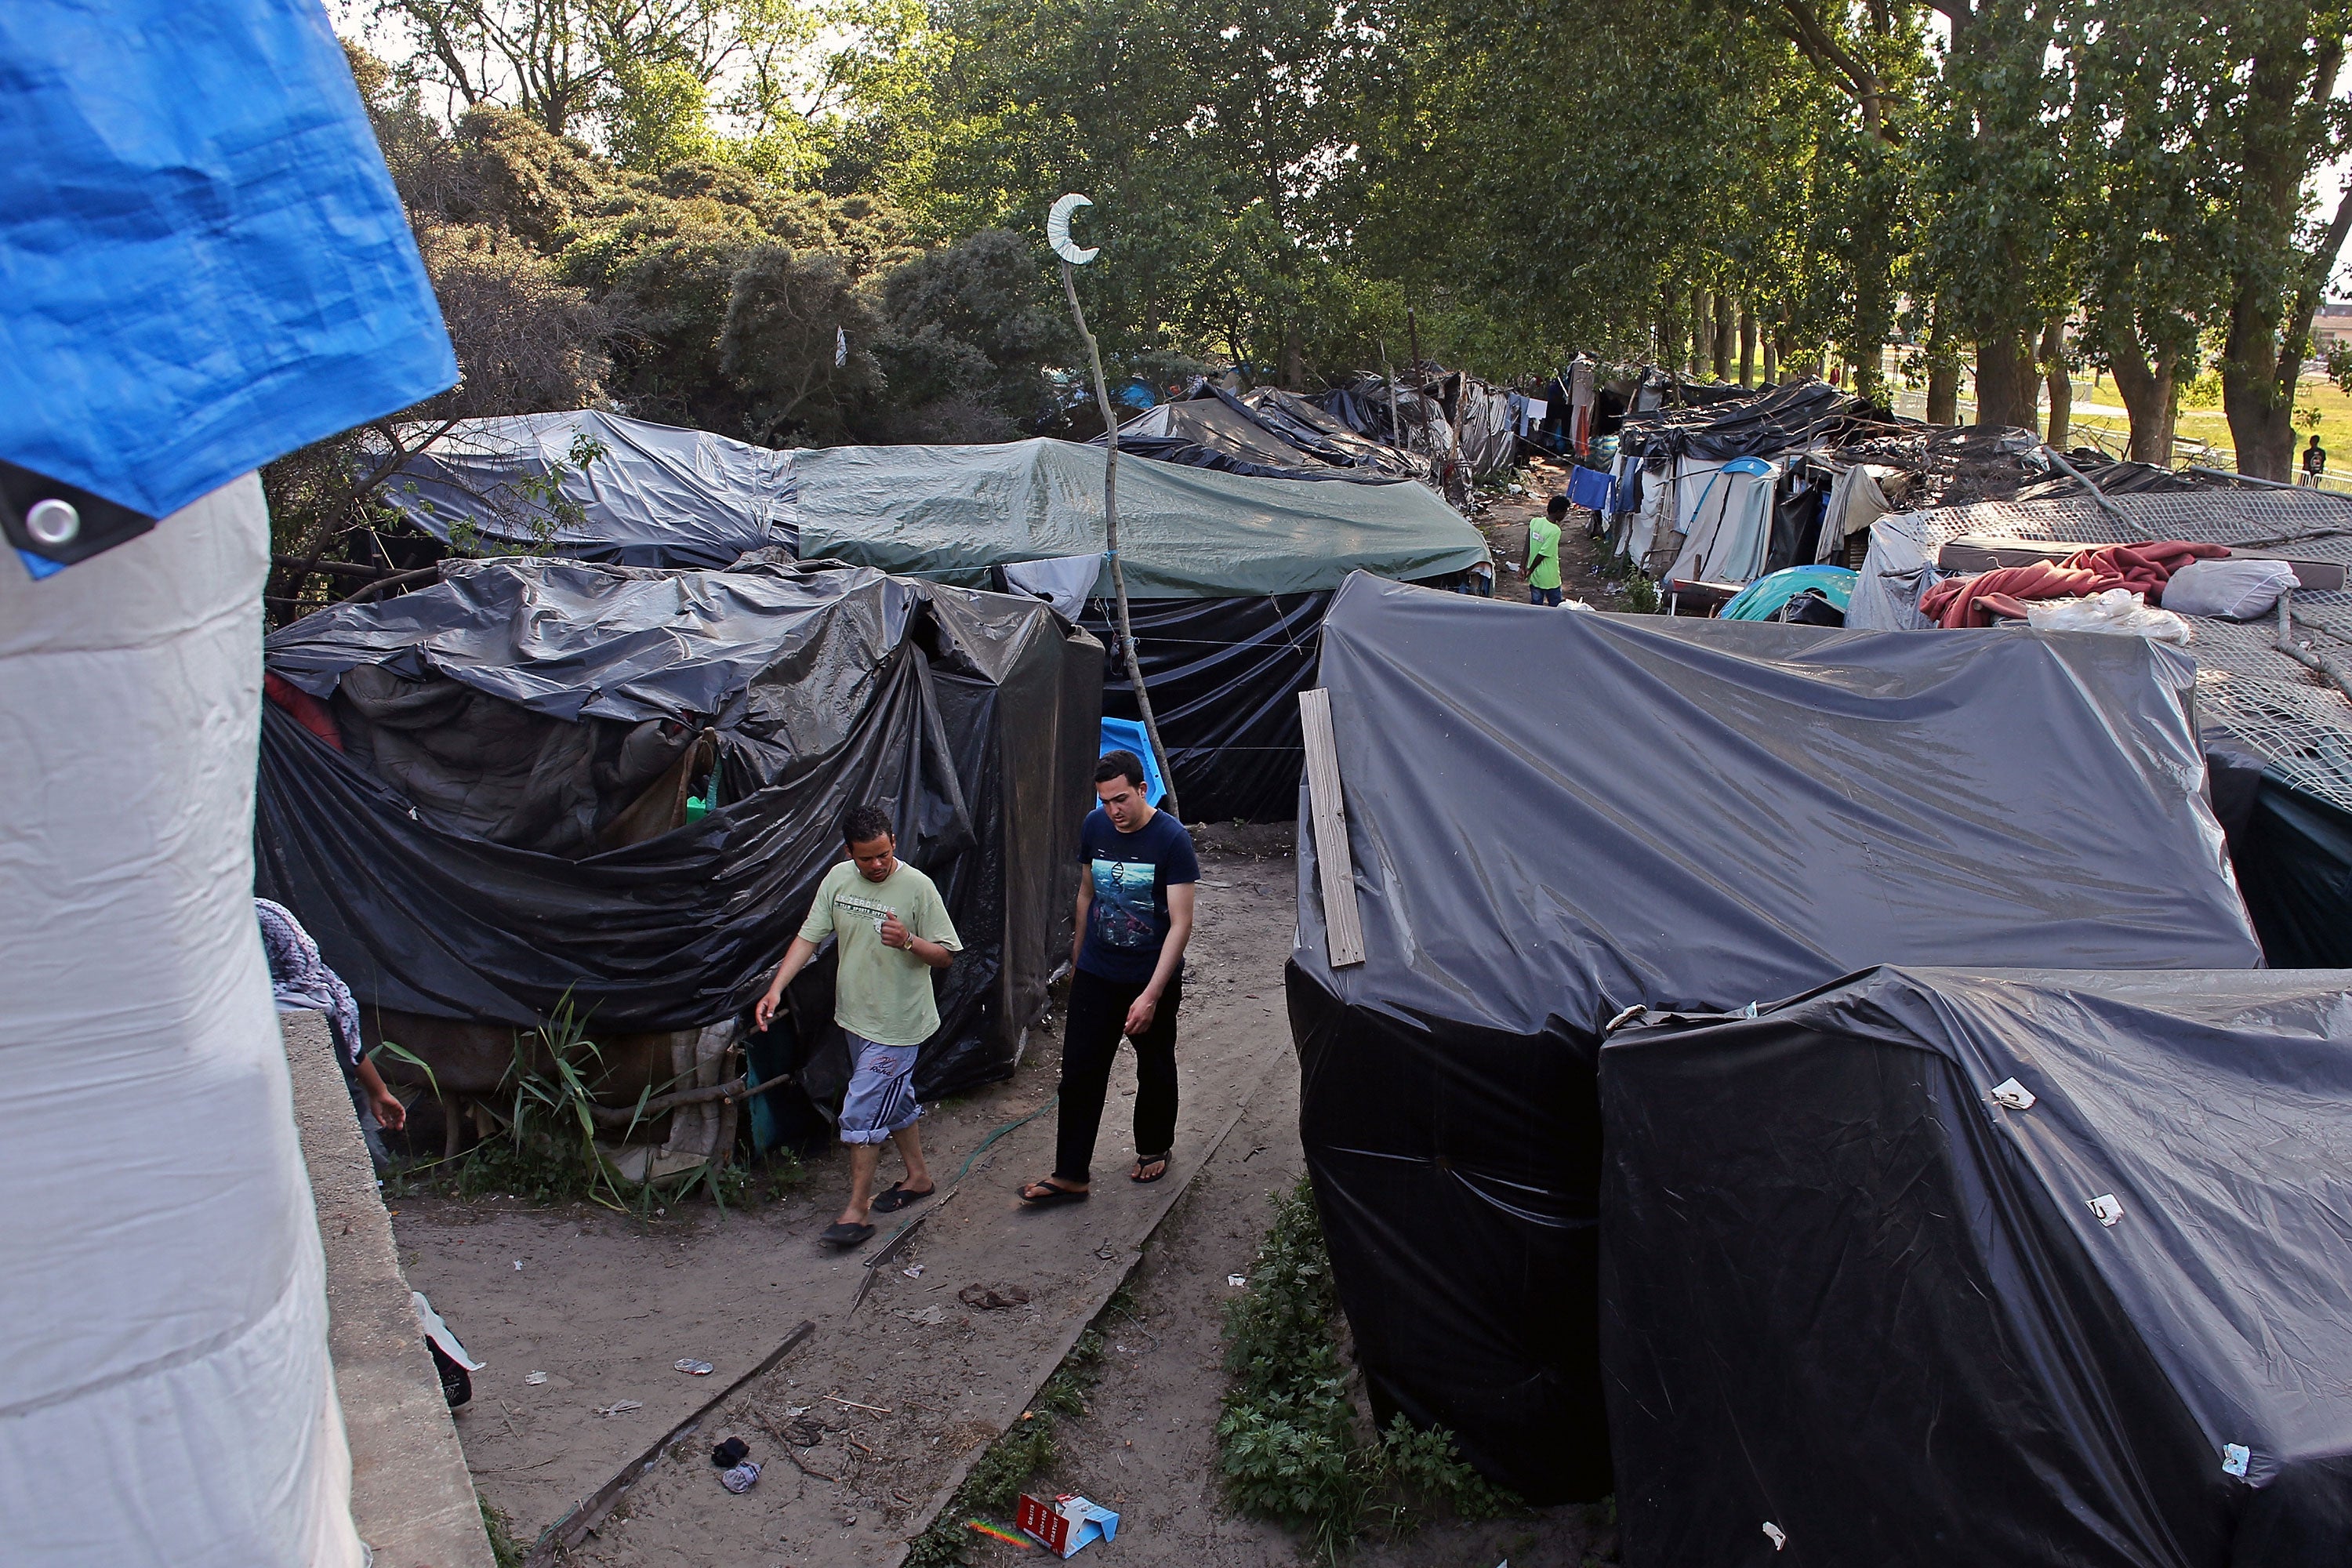 An open air shanty town known as “the new jungle” is home to around 2,000 migrants from across the world